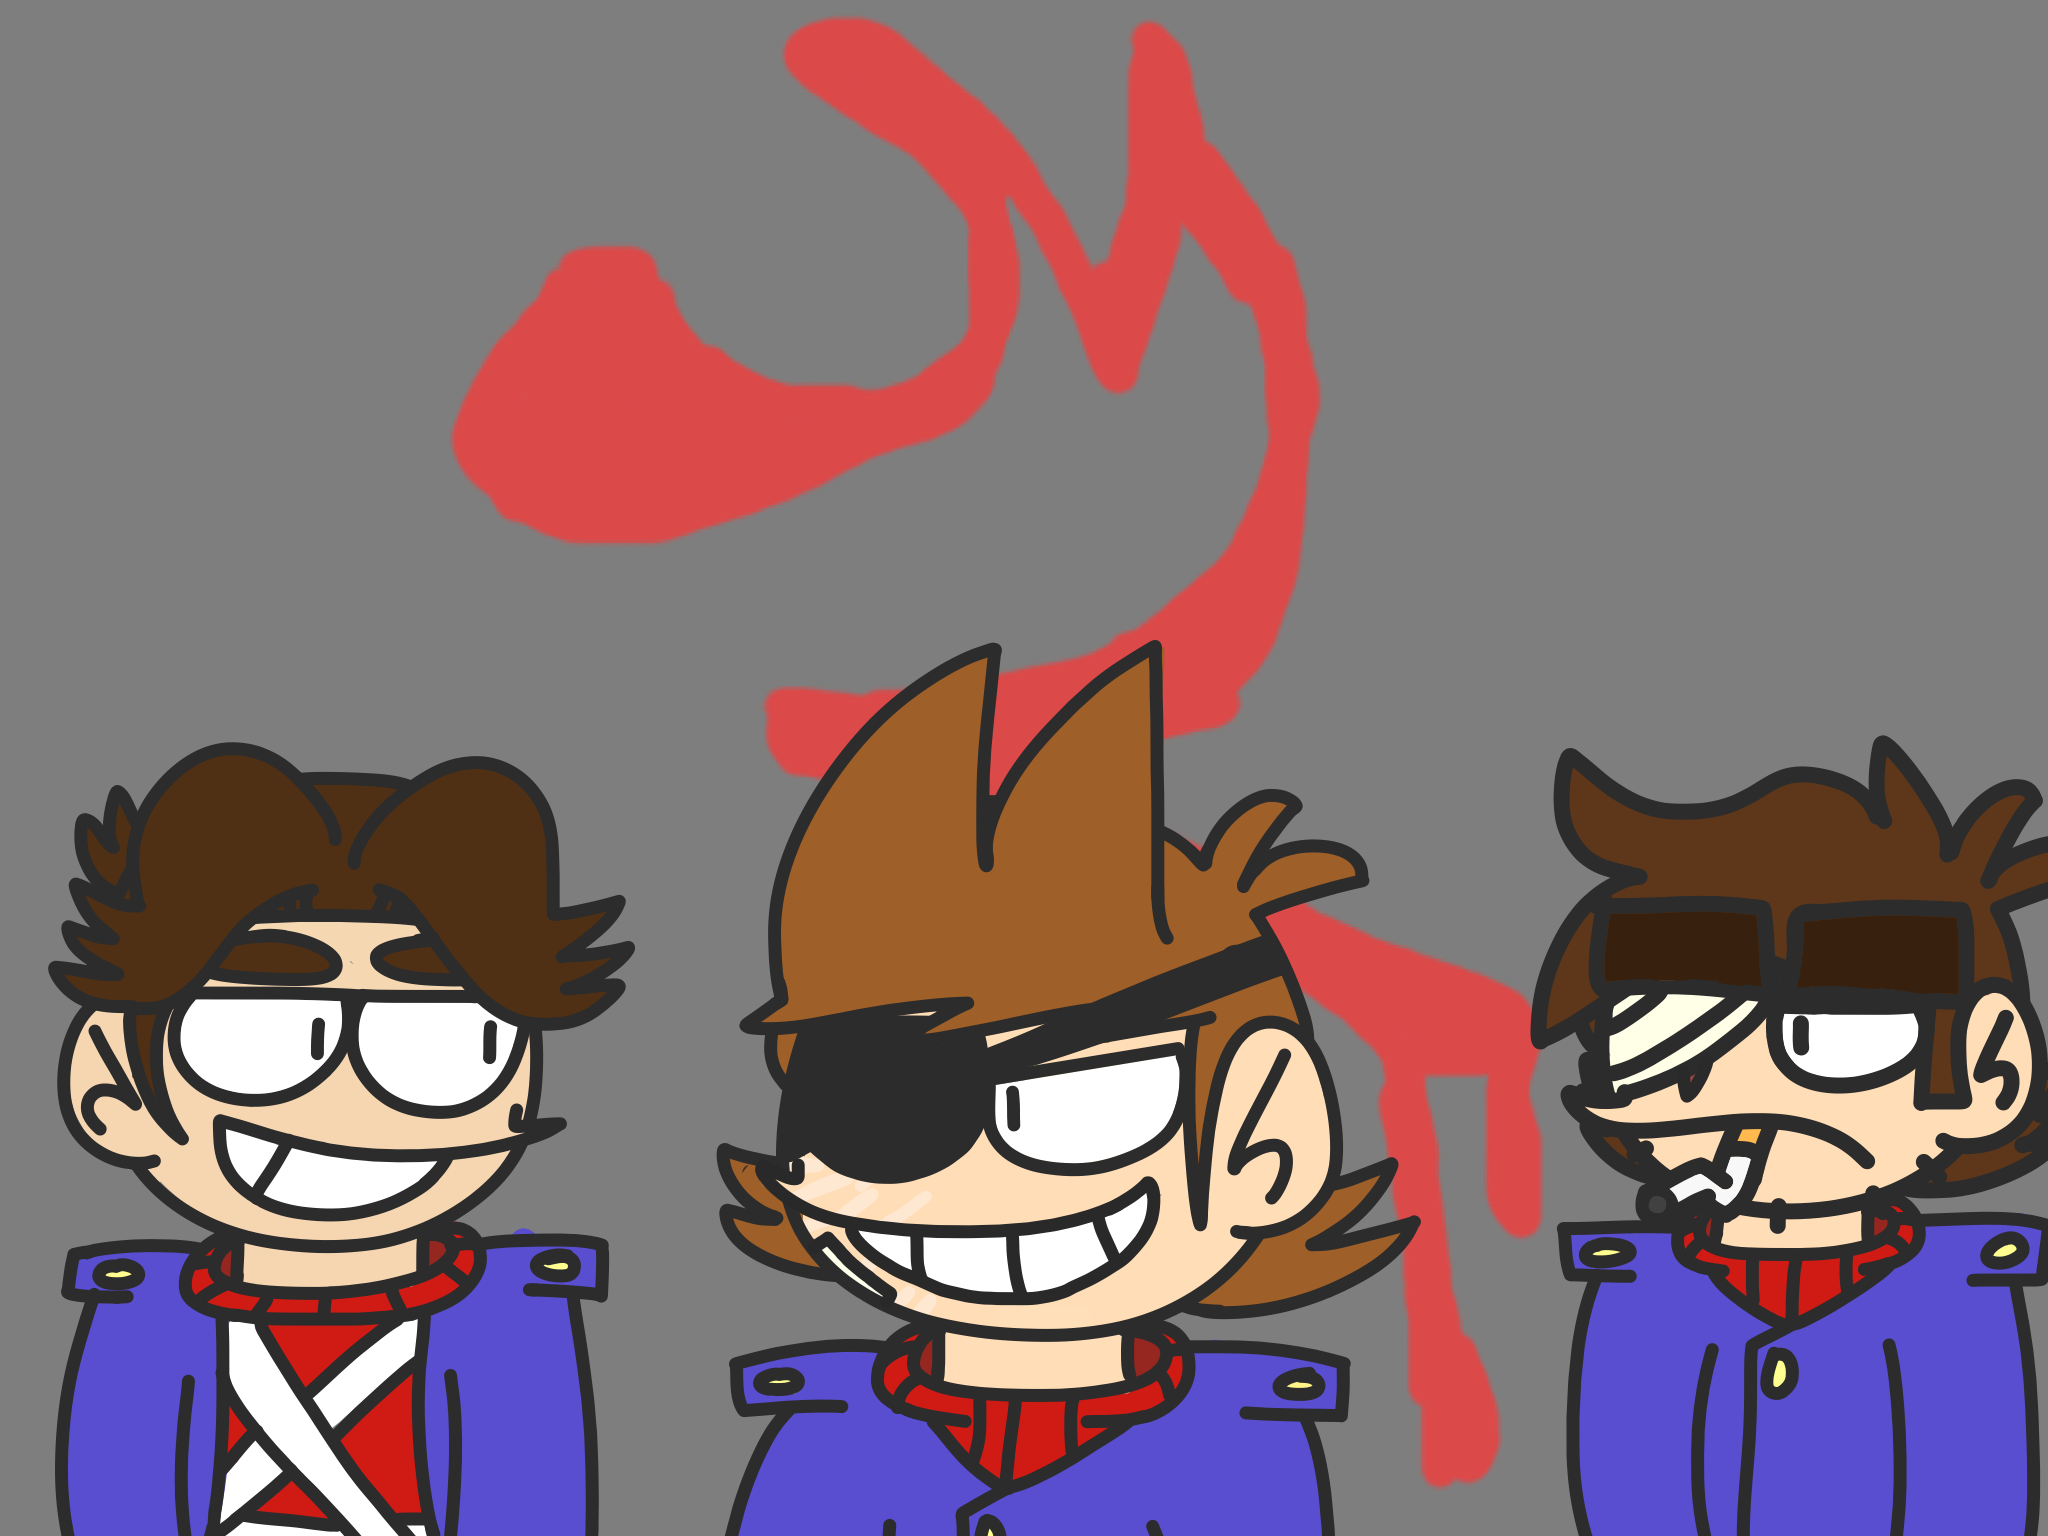 The Red Army (EDDSWORLD) by saltywater on DeviantArt